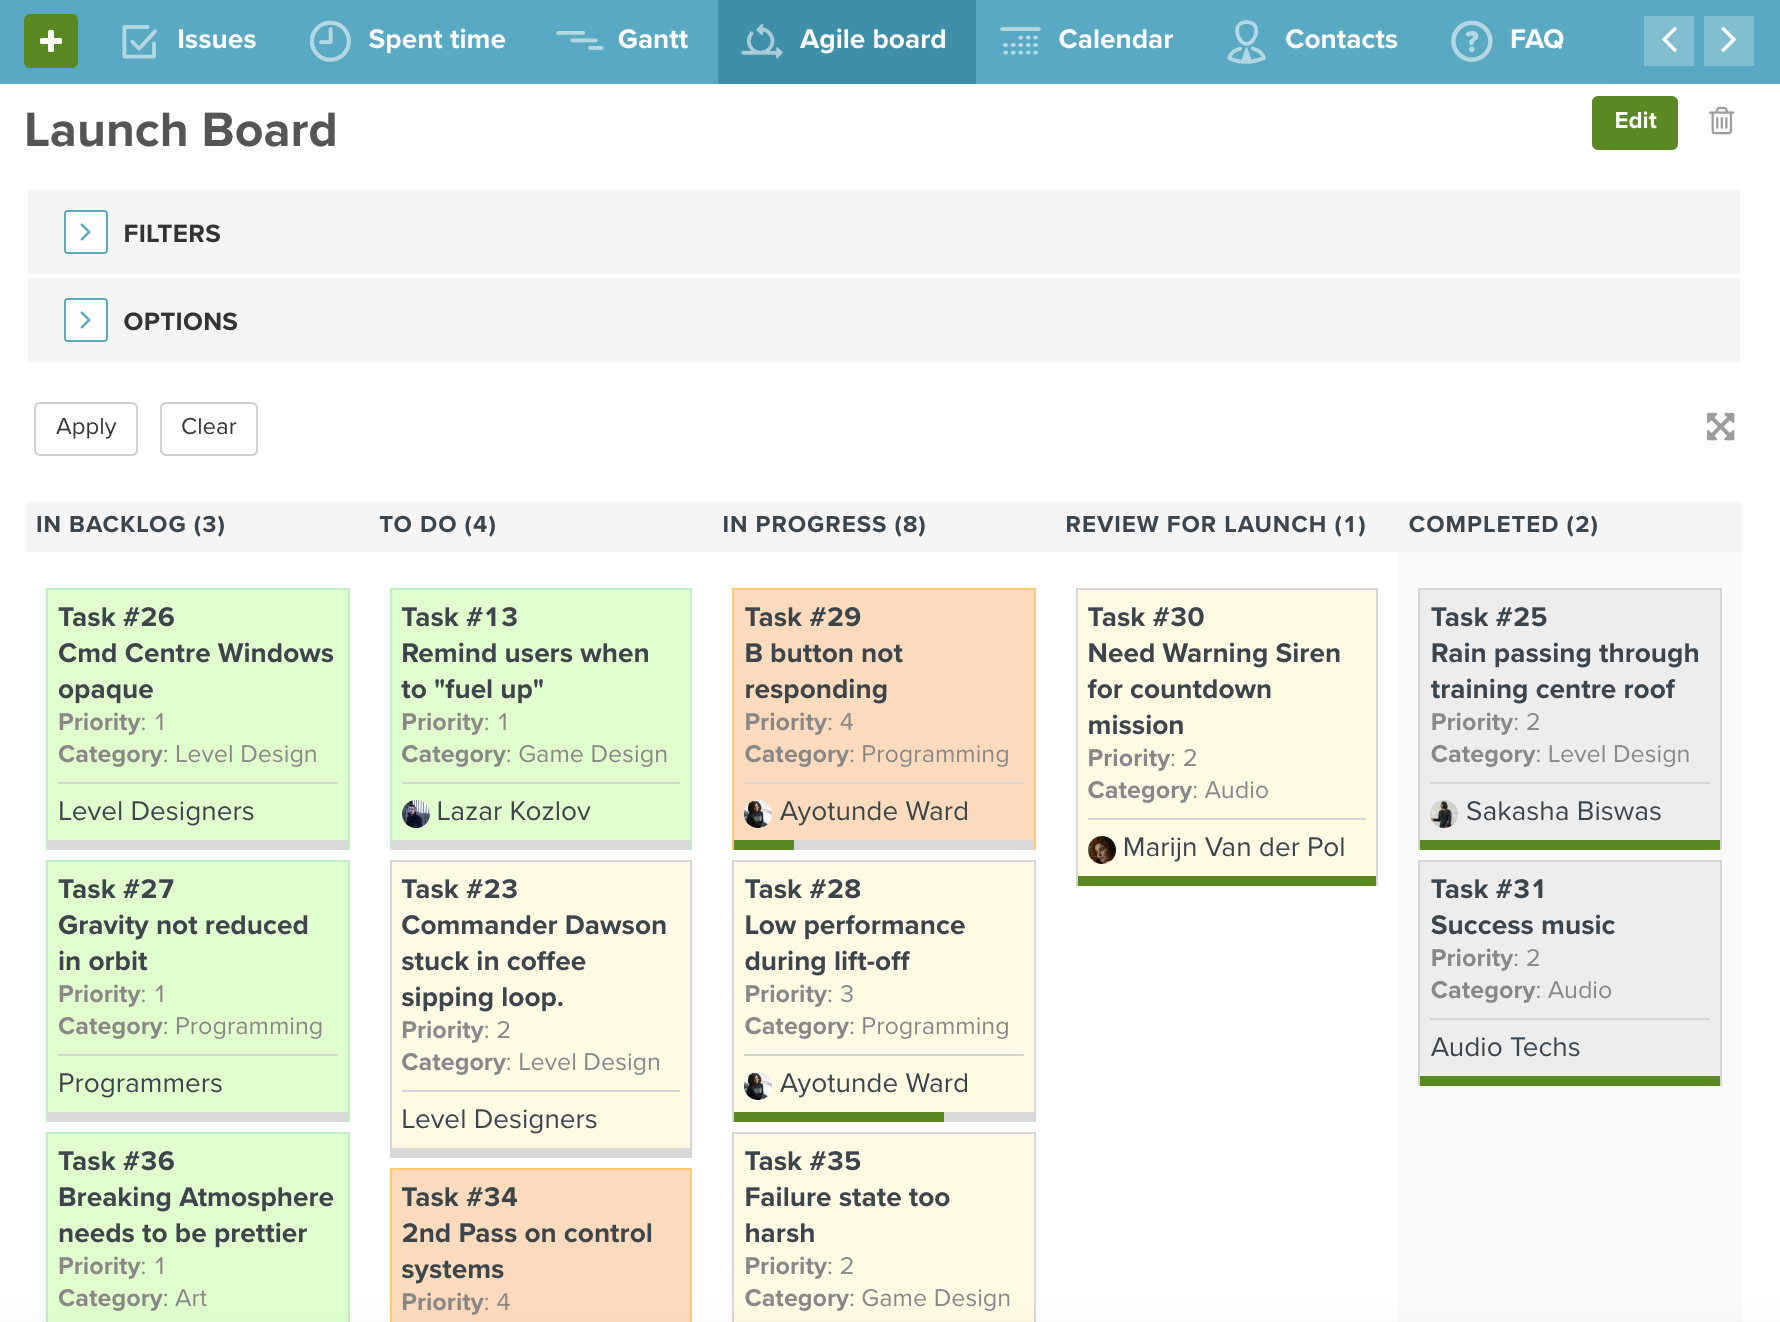 Agile board showing launch plans for a new game